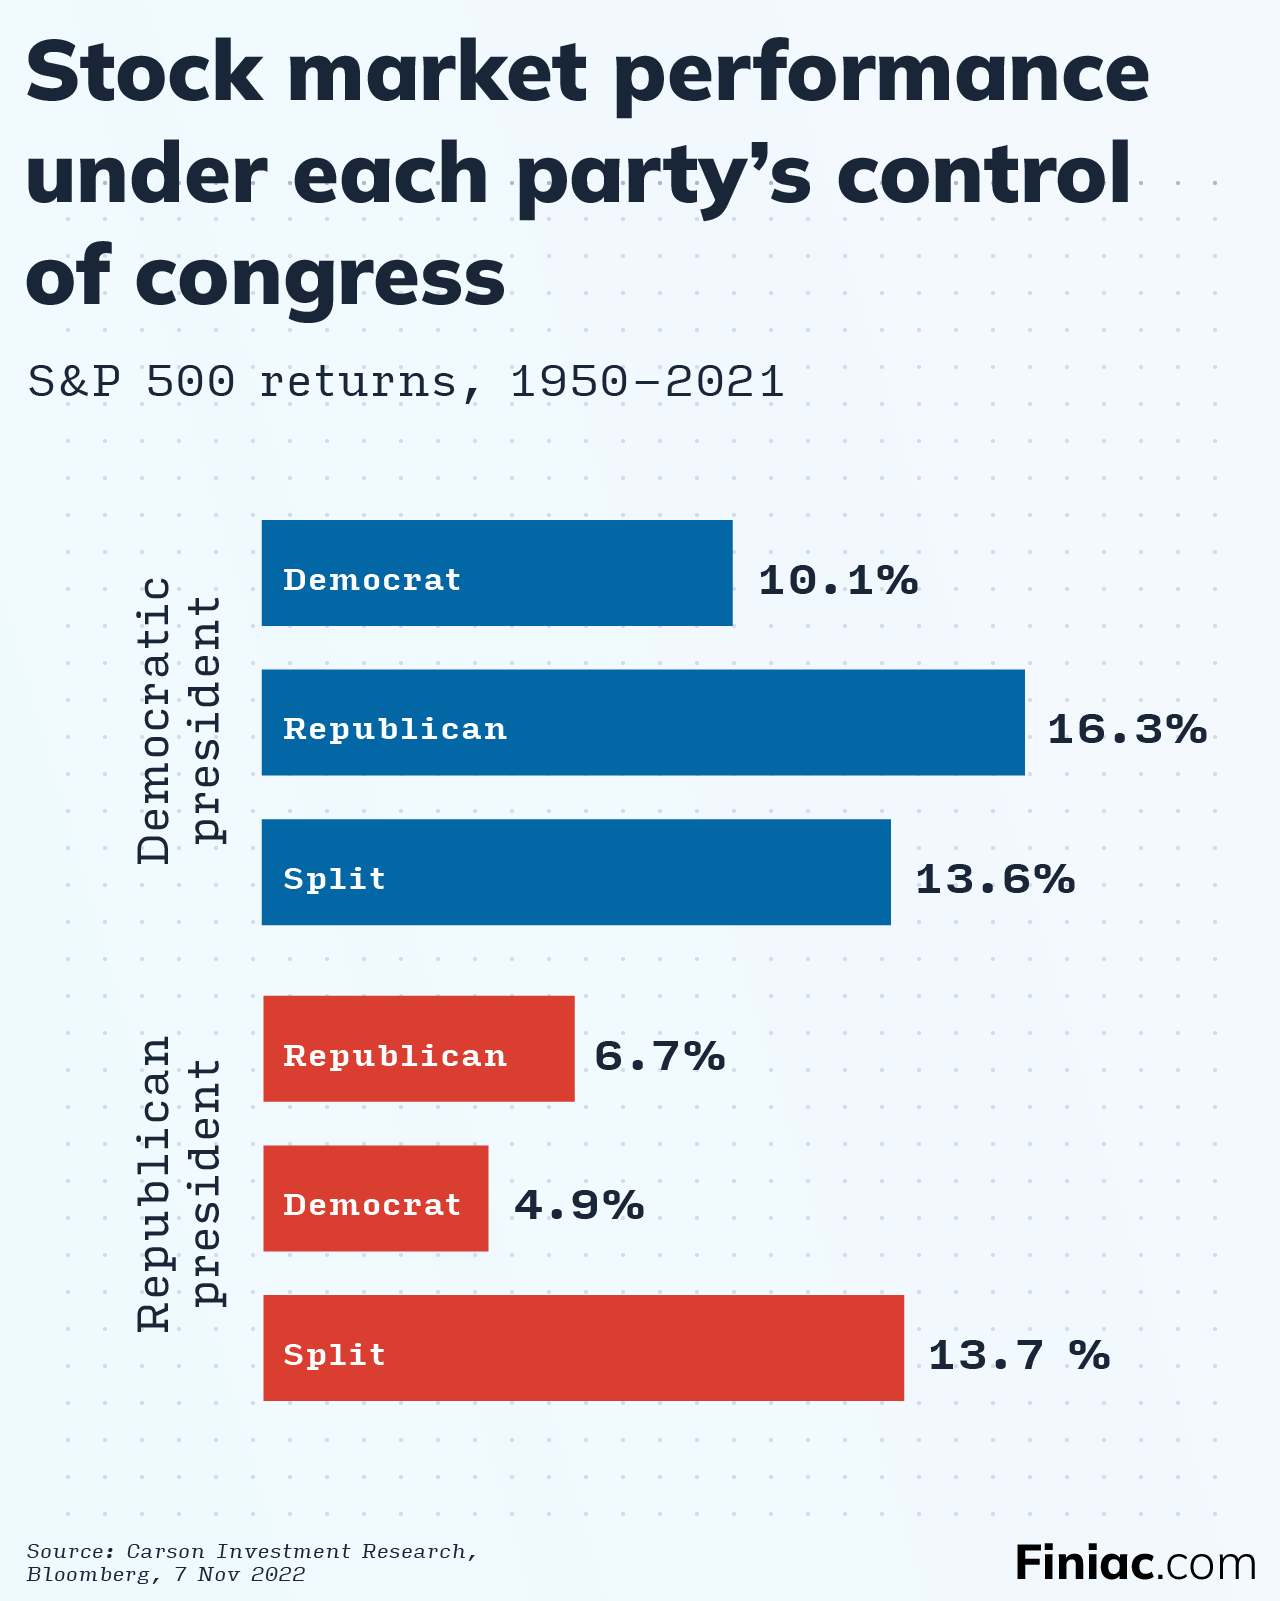 Infographic showing stock market performance broken down by political party of the president in office and the controlling party of congress under that president.